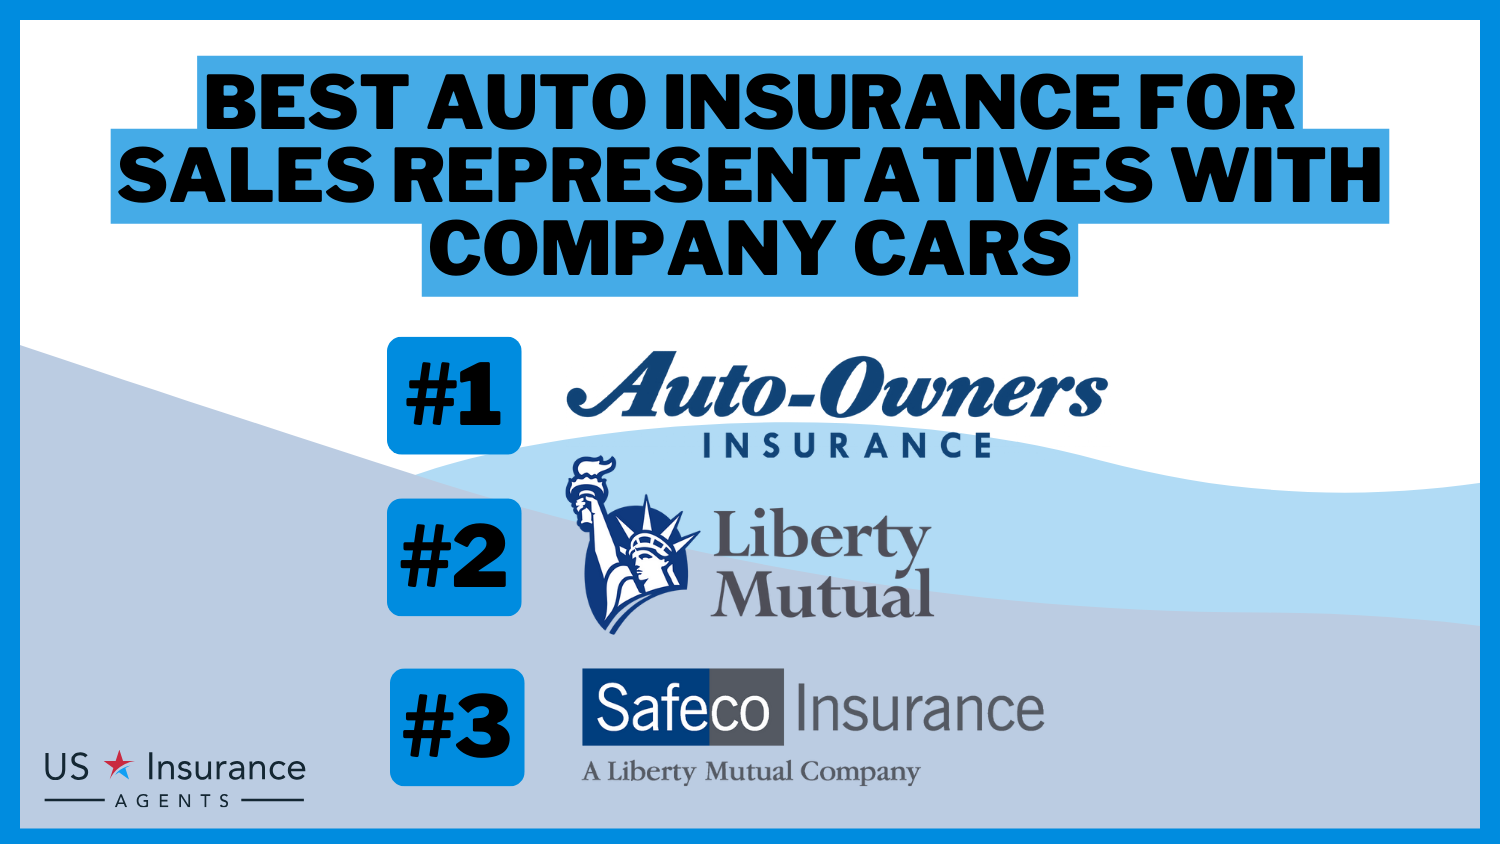 Best Auto Insurance for Sales Representatives With Company Cars: Auto-Owners, Liberty Mutual and Safeco.